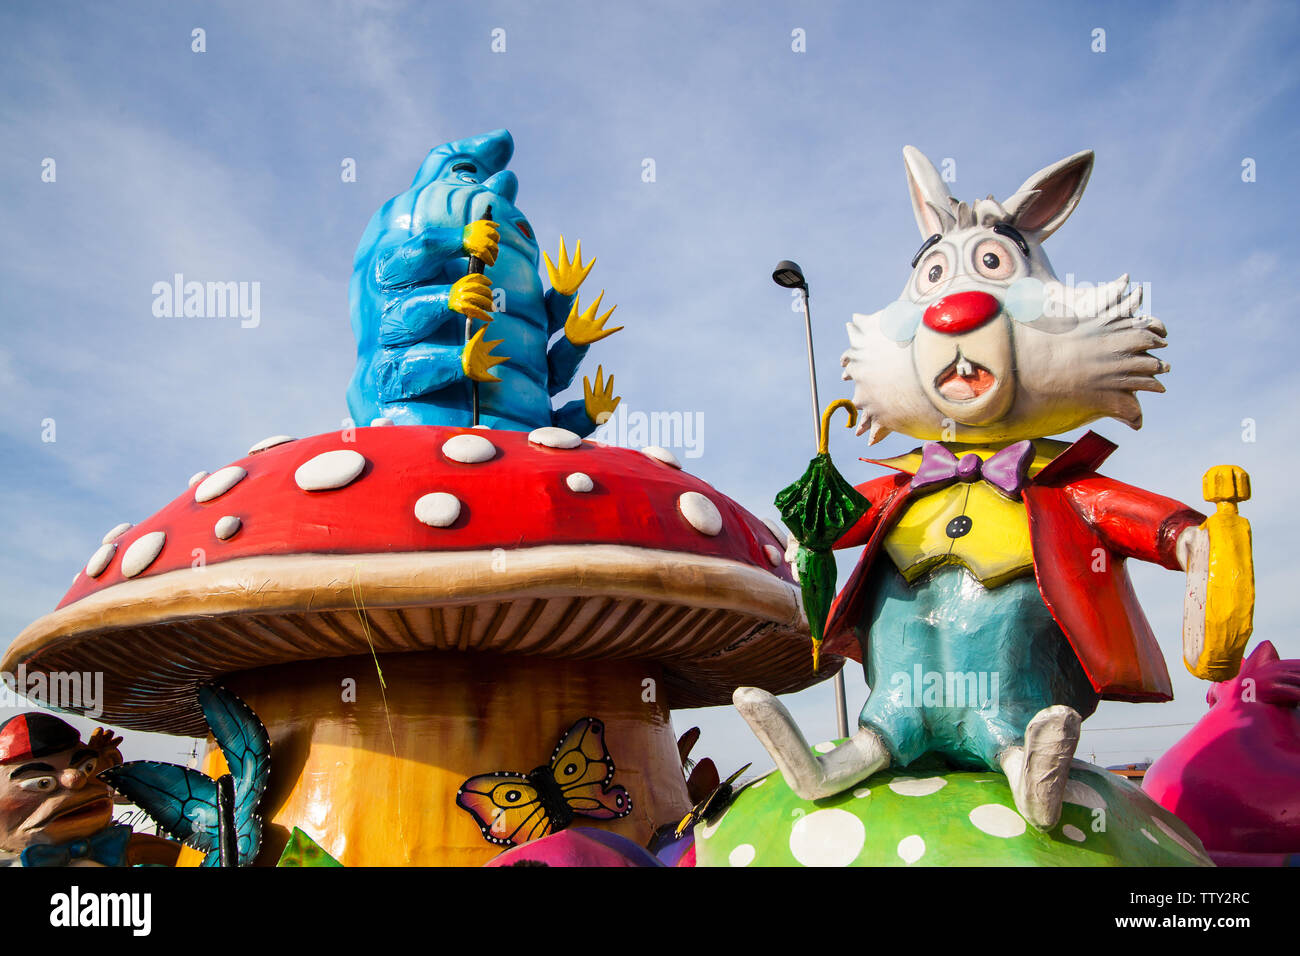 A sculpture with characters from Alice in wonderland Stock Photo